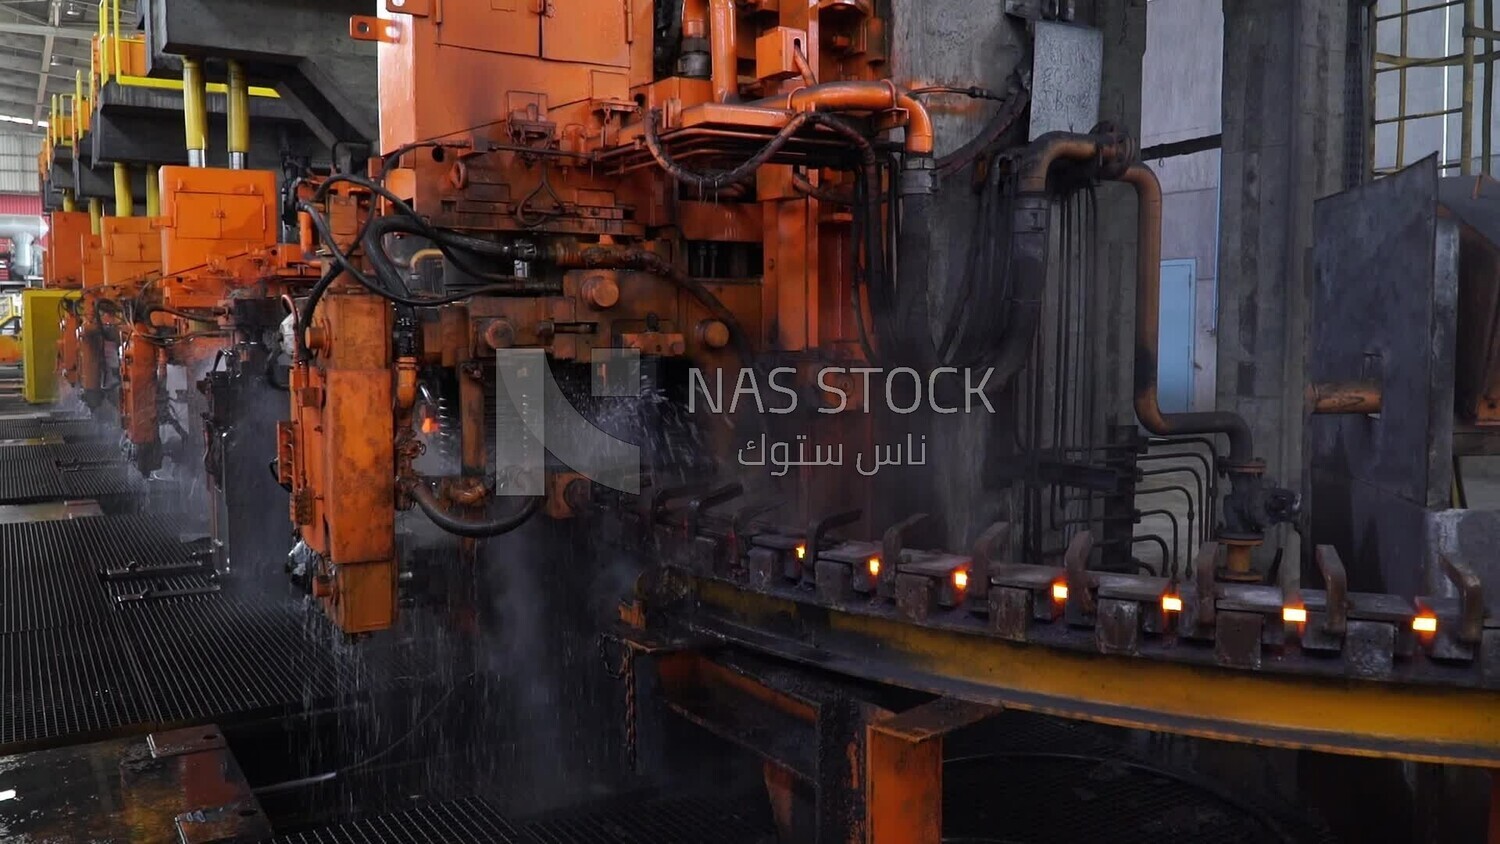 Iron and steel factory